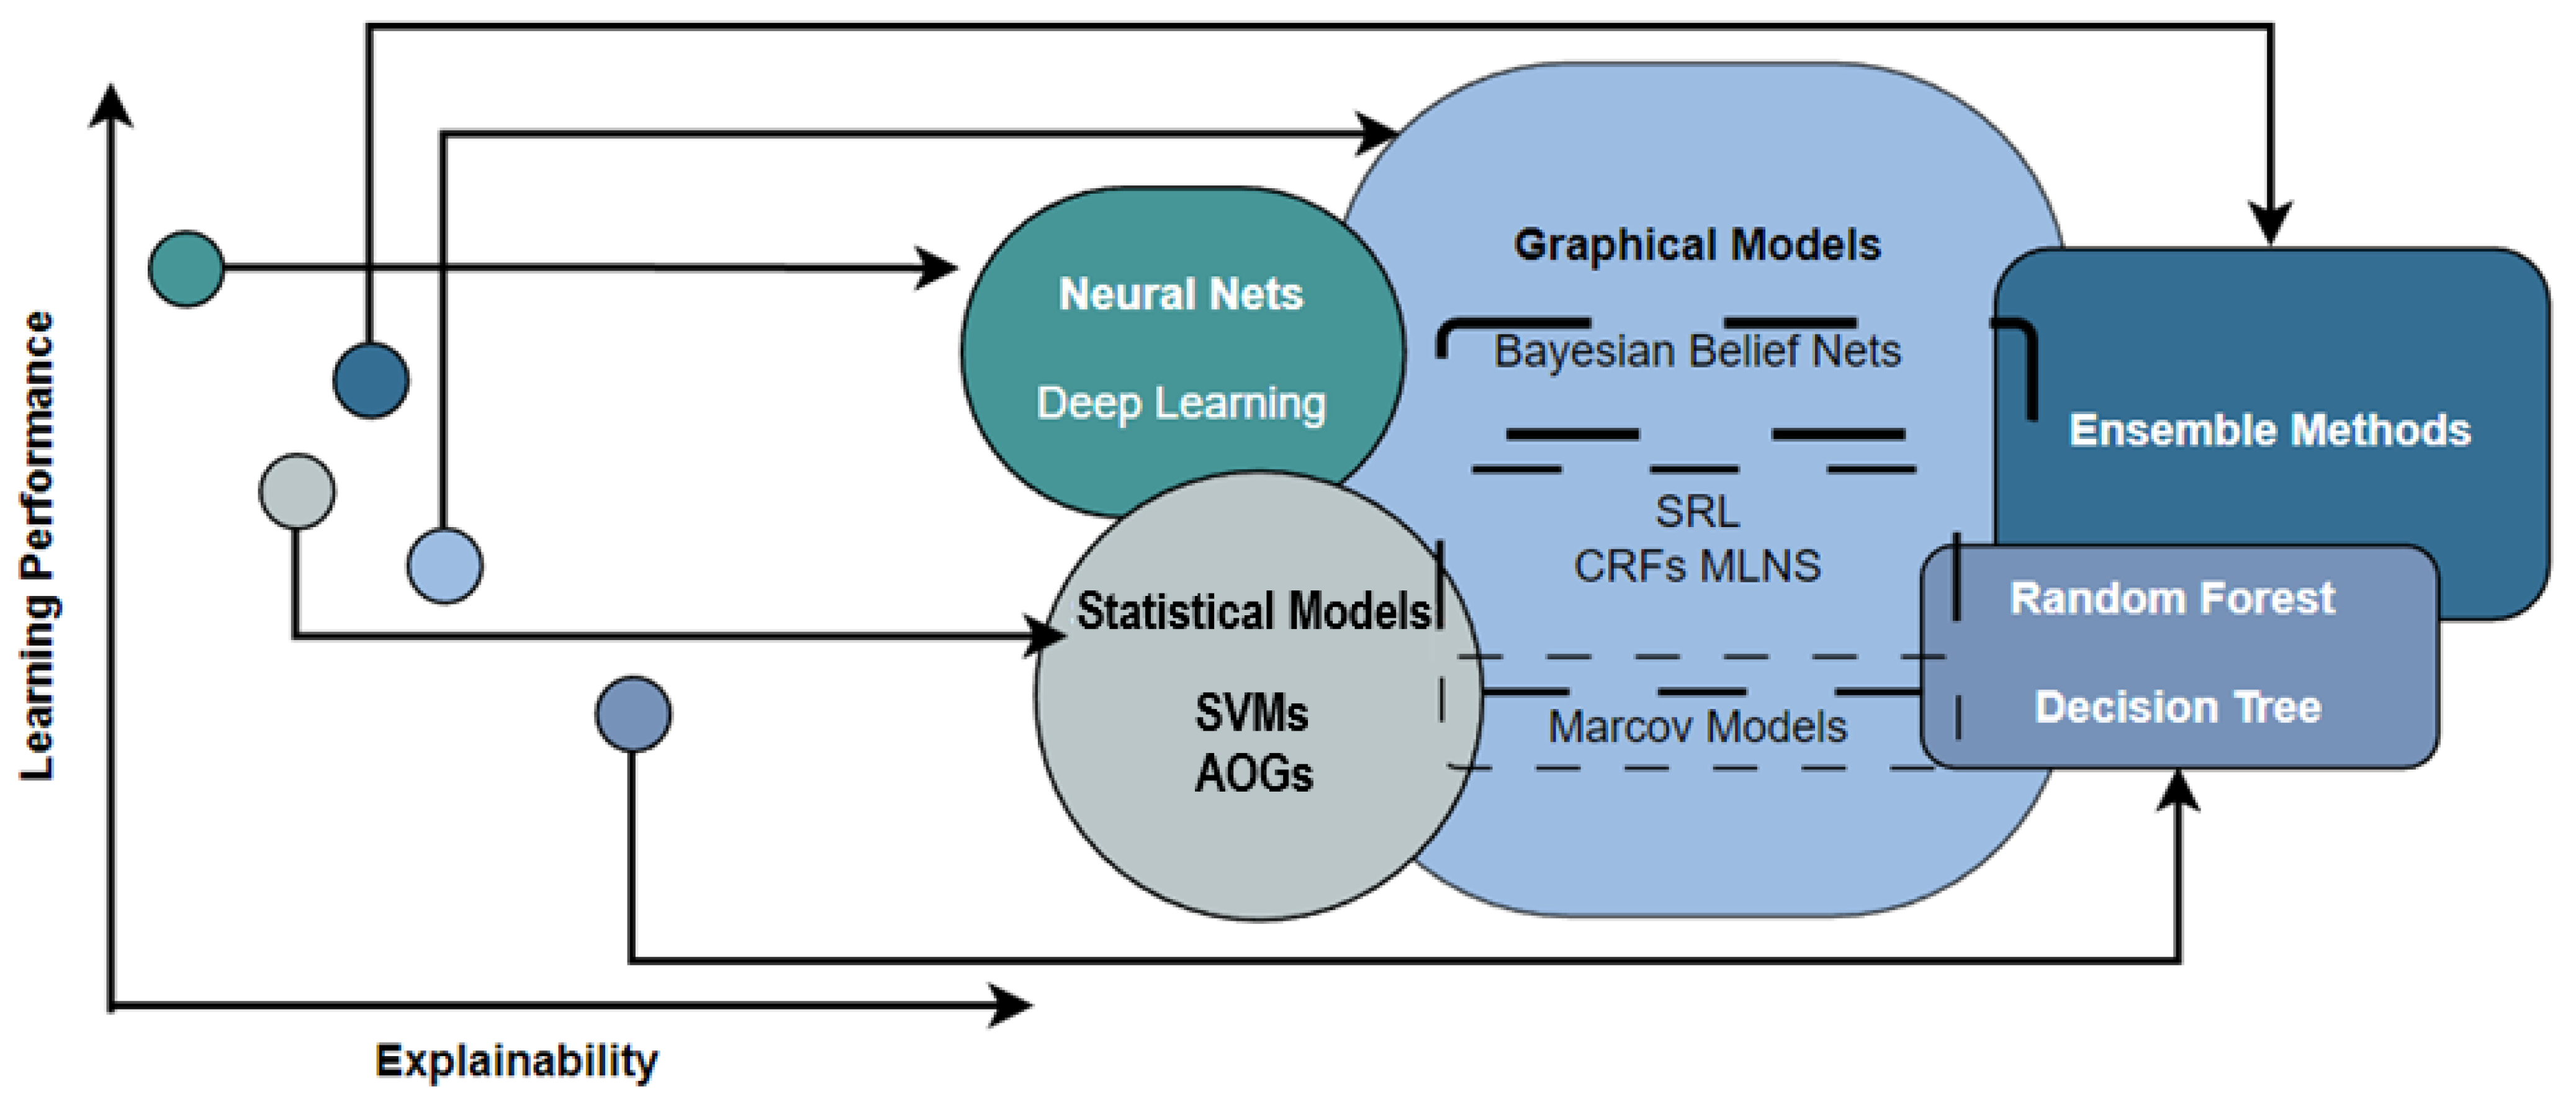 A comparison of explainable artificial intelligence methods in the